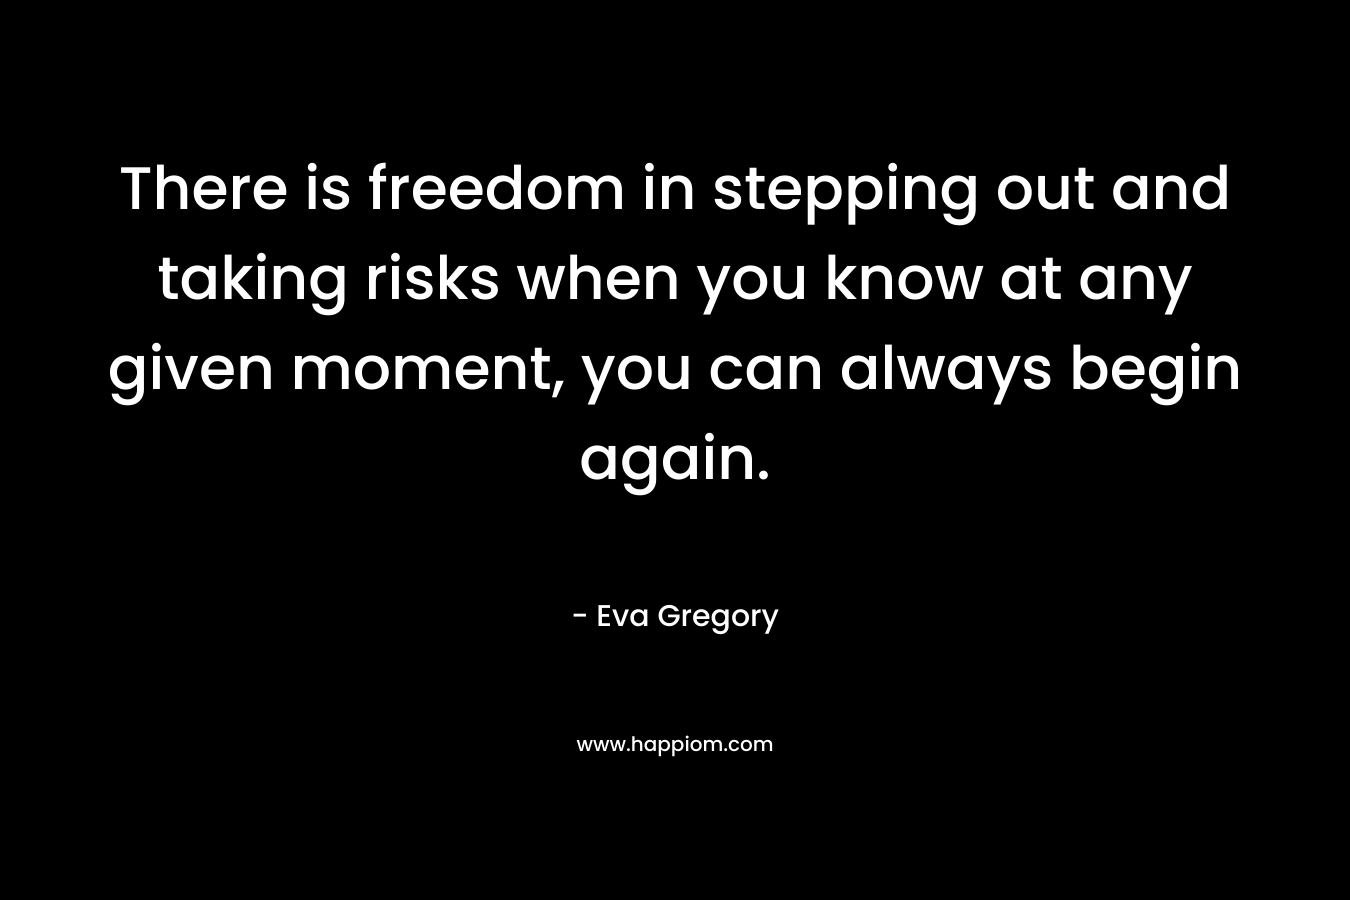 There is freedom in stepping out and taking risks when you know at any given moment, you can always begin again. – Eva Gregory